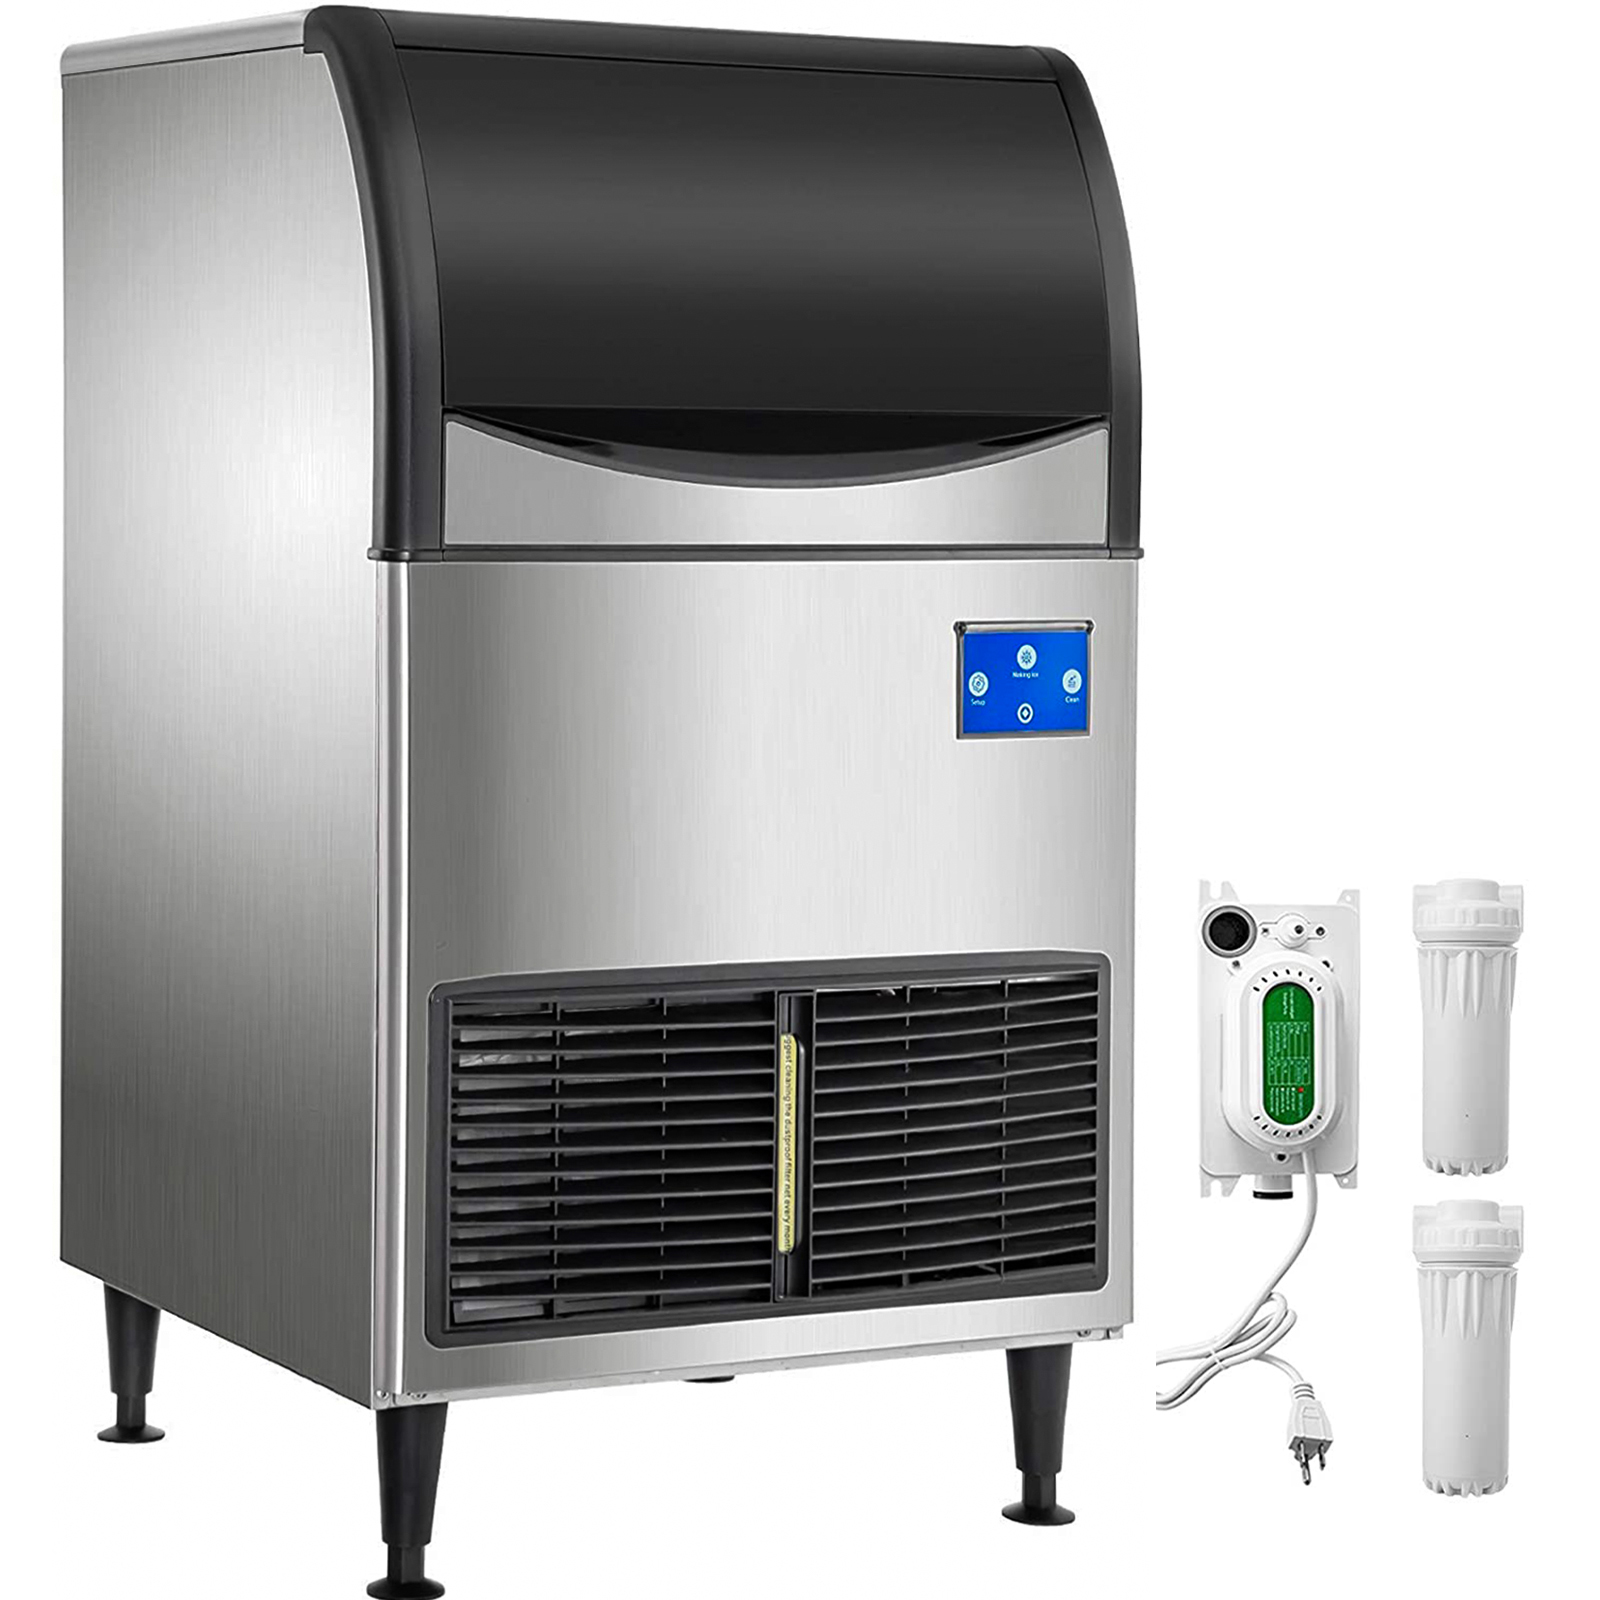 https://d2qc09rl1gfuof.cloudfront.net/product/ZNFBZBJDB255A0001/commercial-ice-maker-m100-1.2.jpg